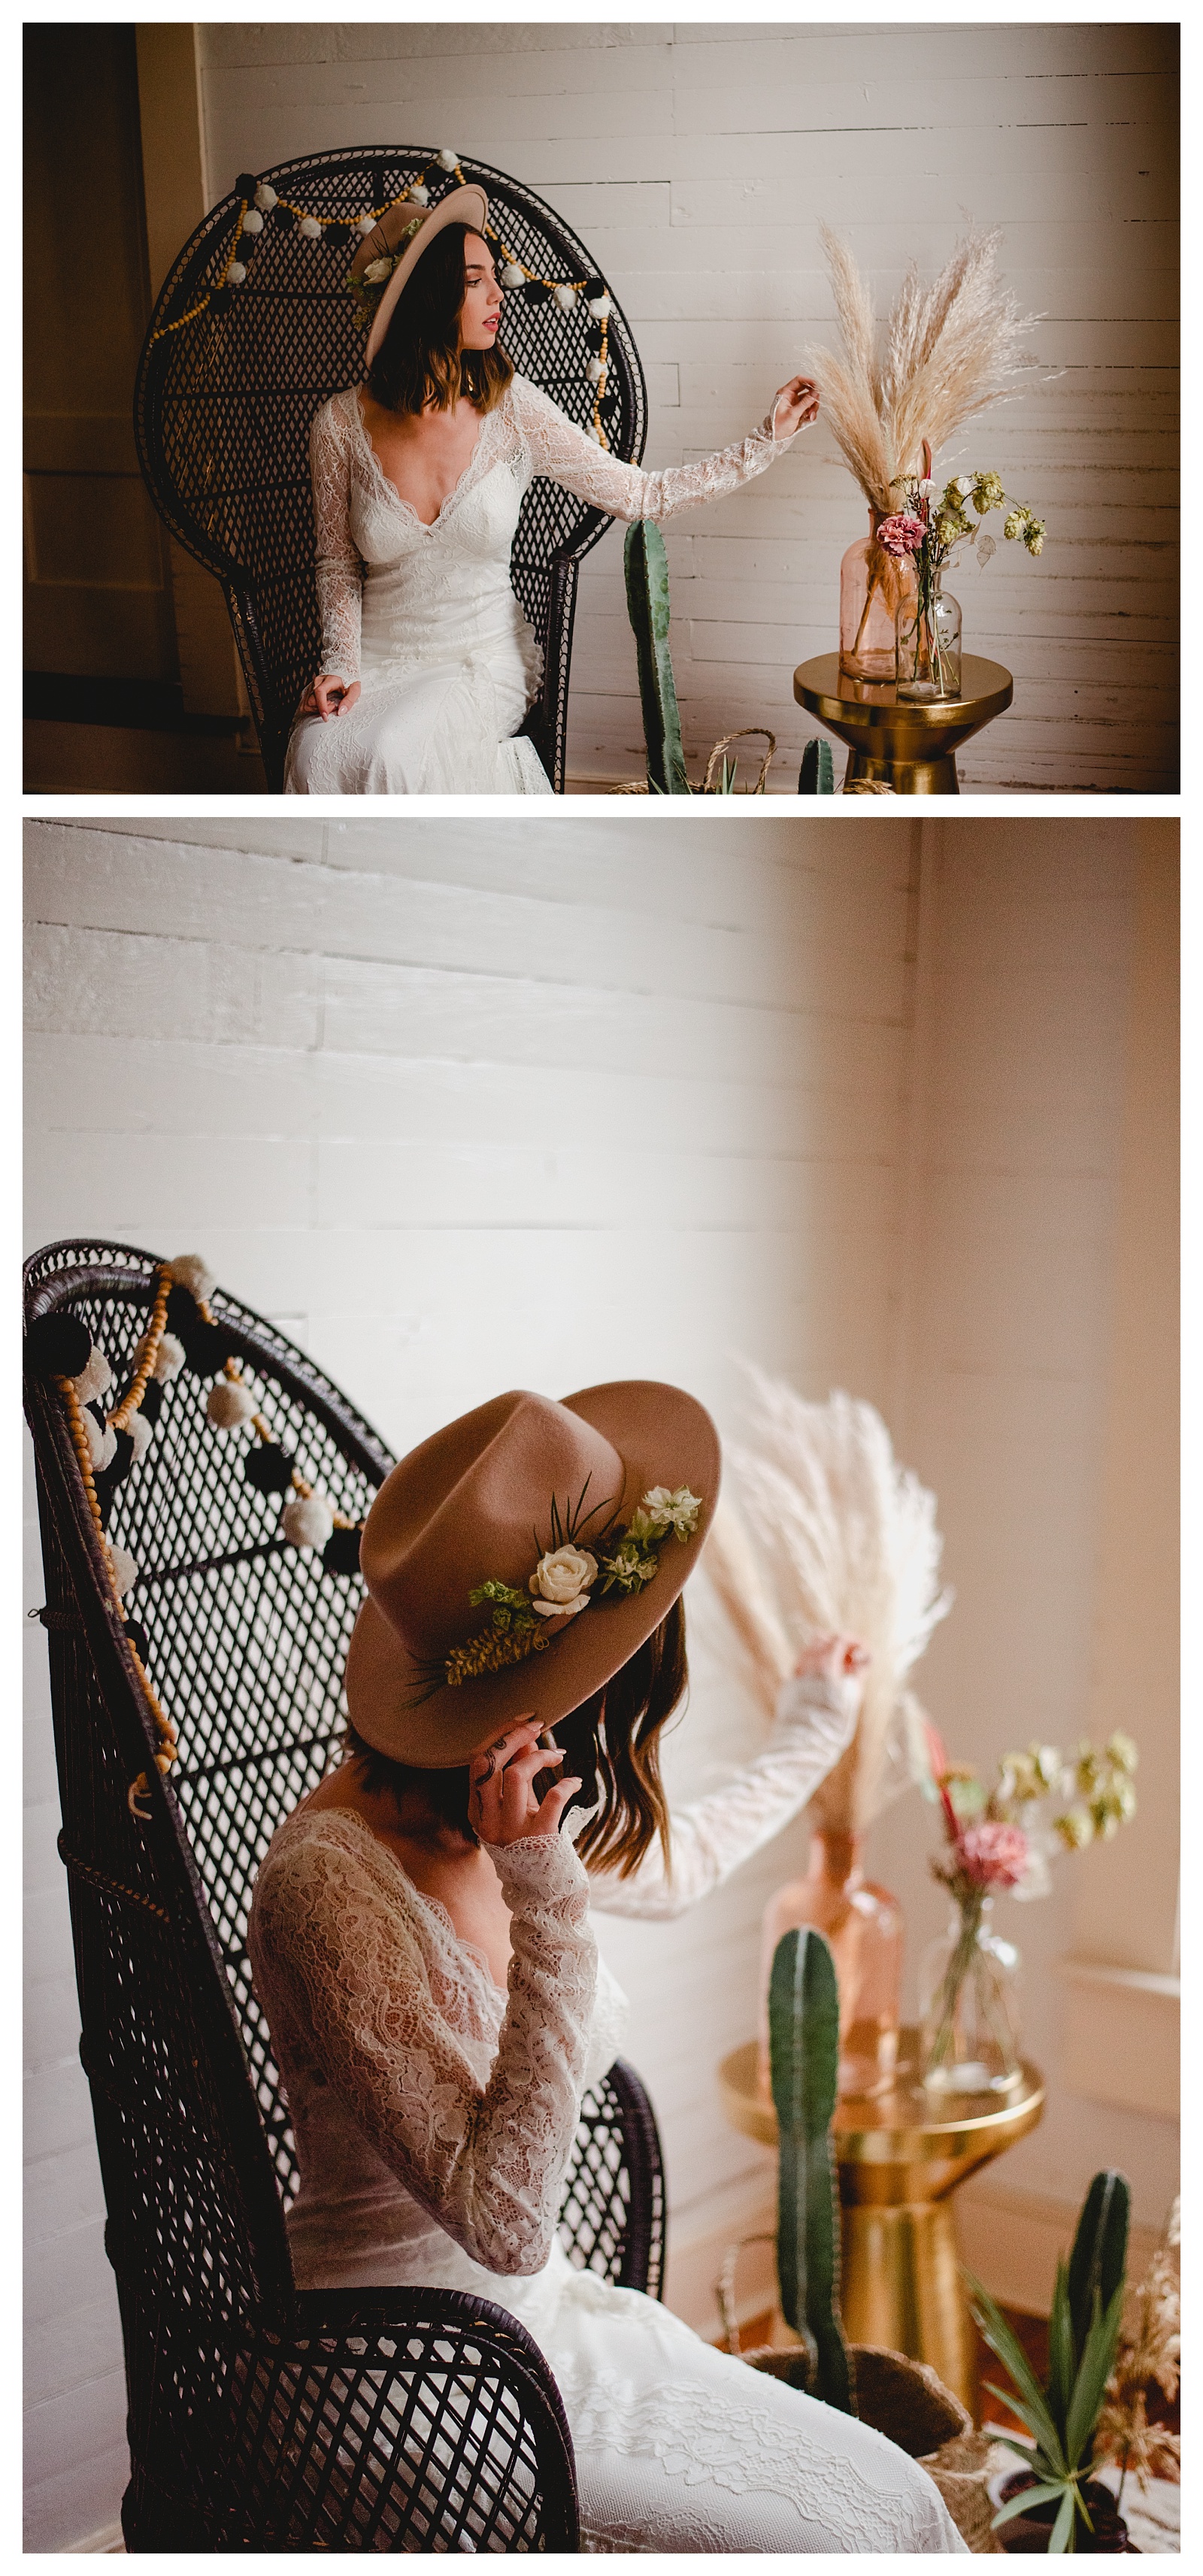 Creative bridal photos by Tallahassee Photographer, Shelly Williams